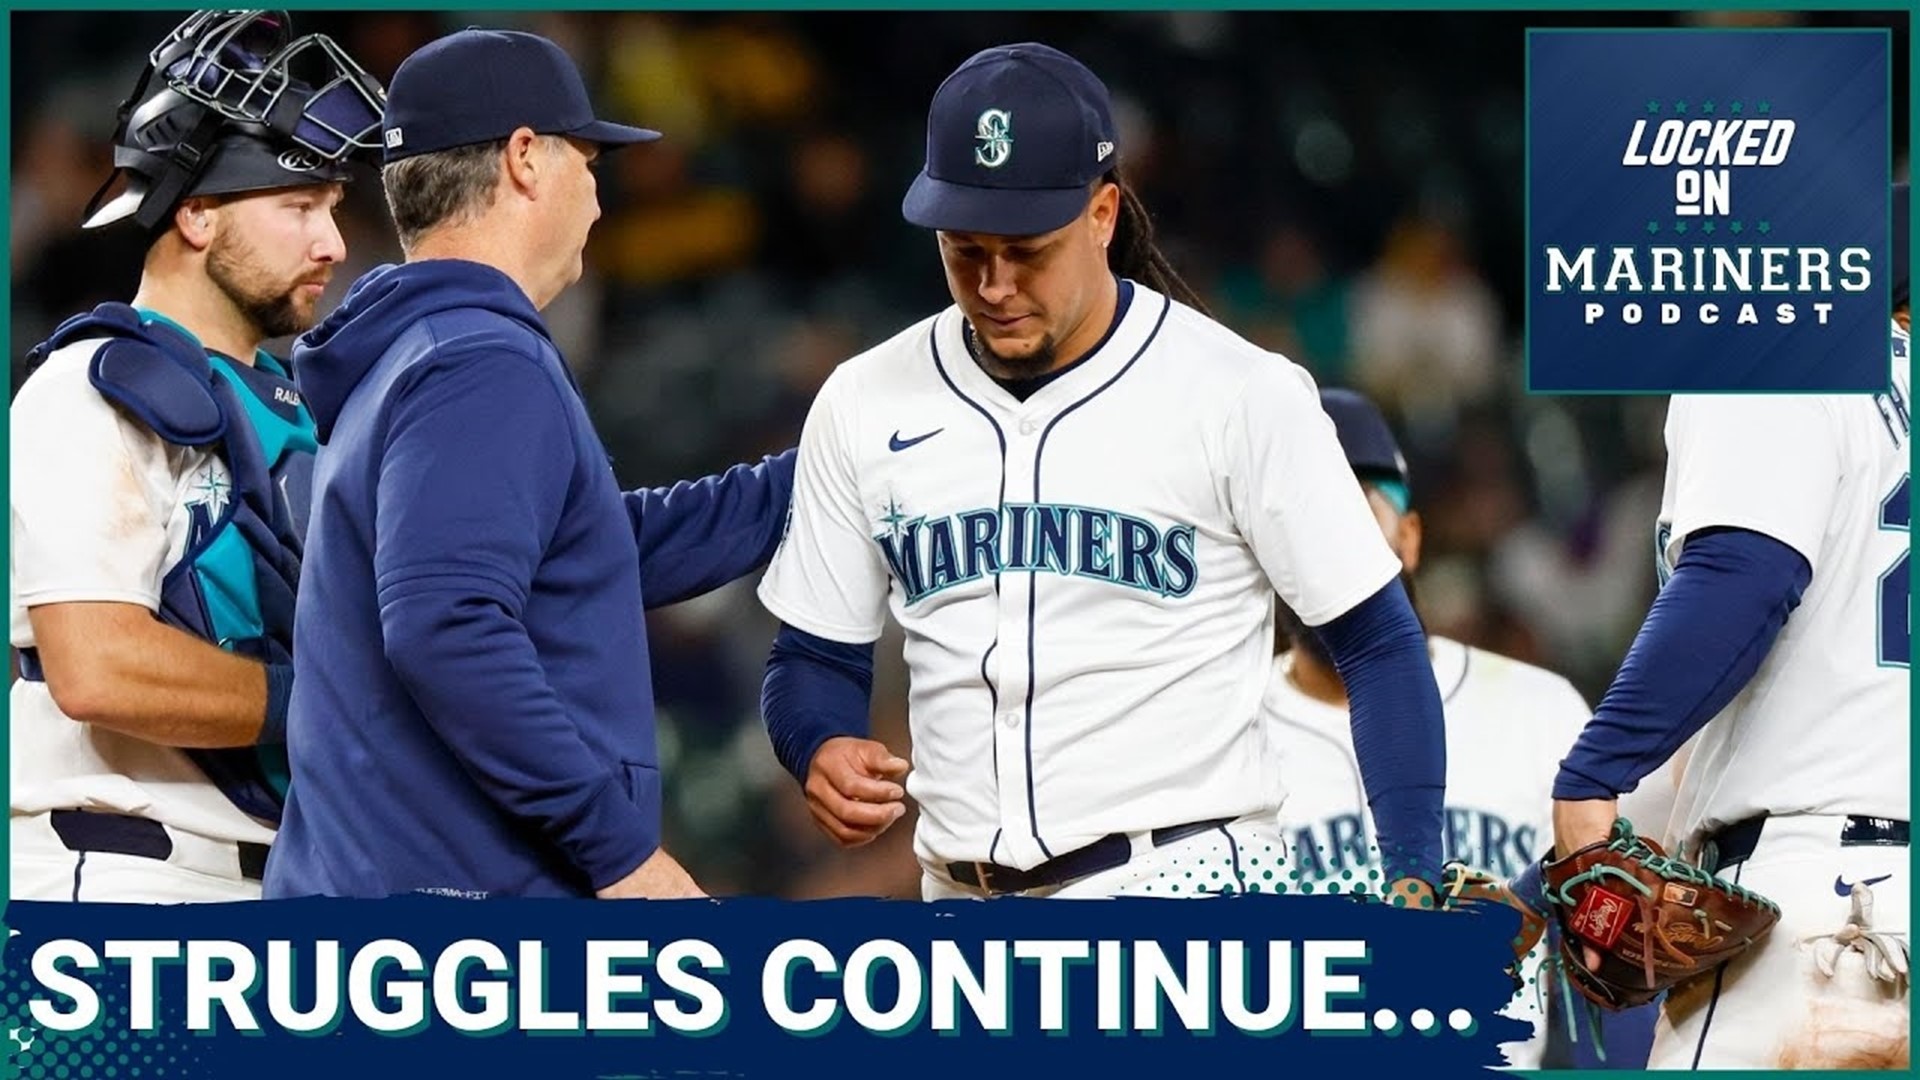 Luis Castillo's struggles continued on Tuesday night, with the Mariners' ace surrendering four runs on 10 hits to the Guardians in nearly six innings of work.